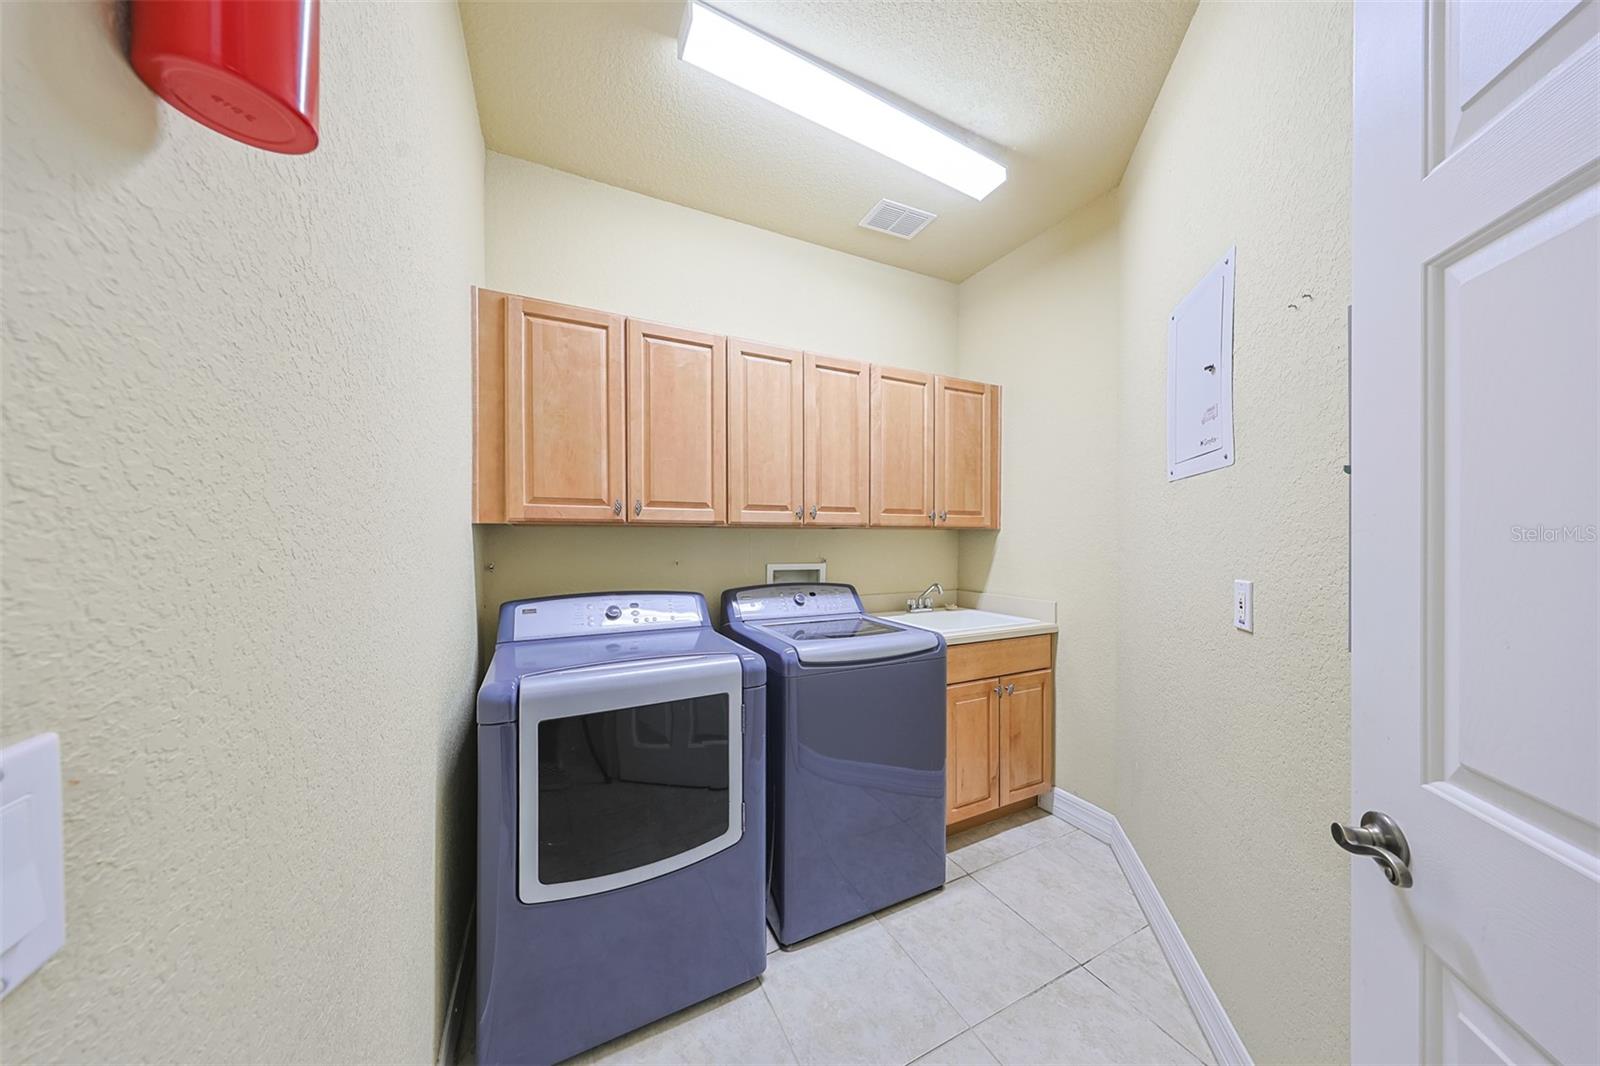 Separate indoor laundry room with lots of cabinets for storage, good lighting and a utility sink make the task of doing laundry easier.